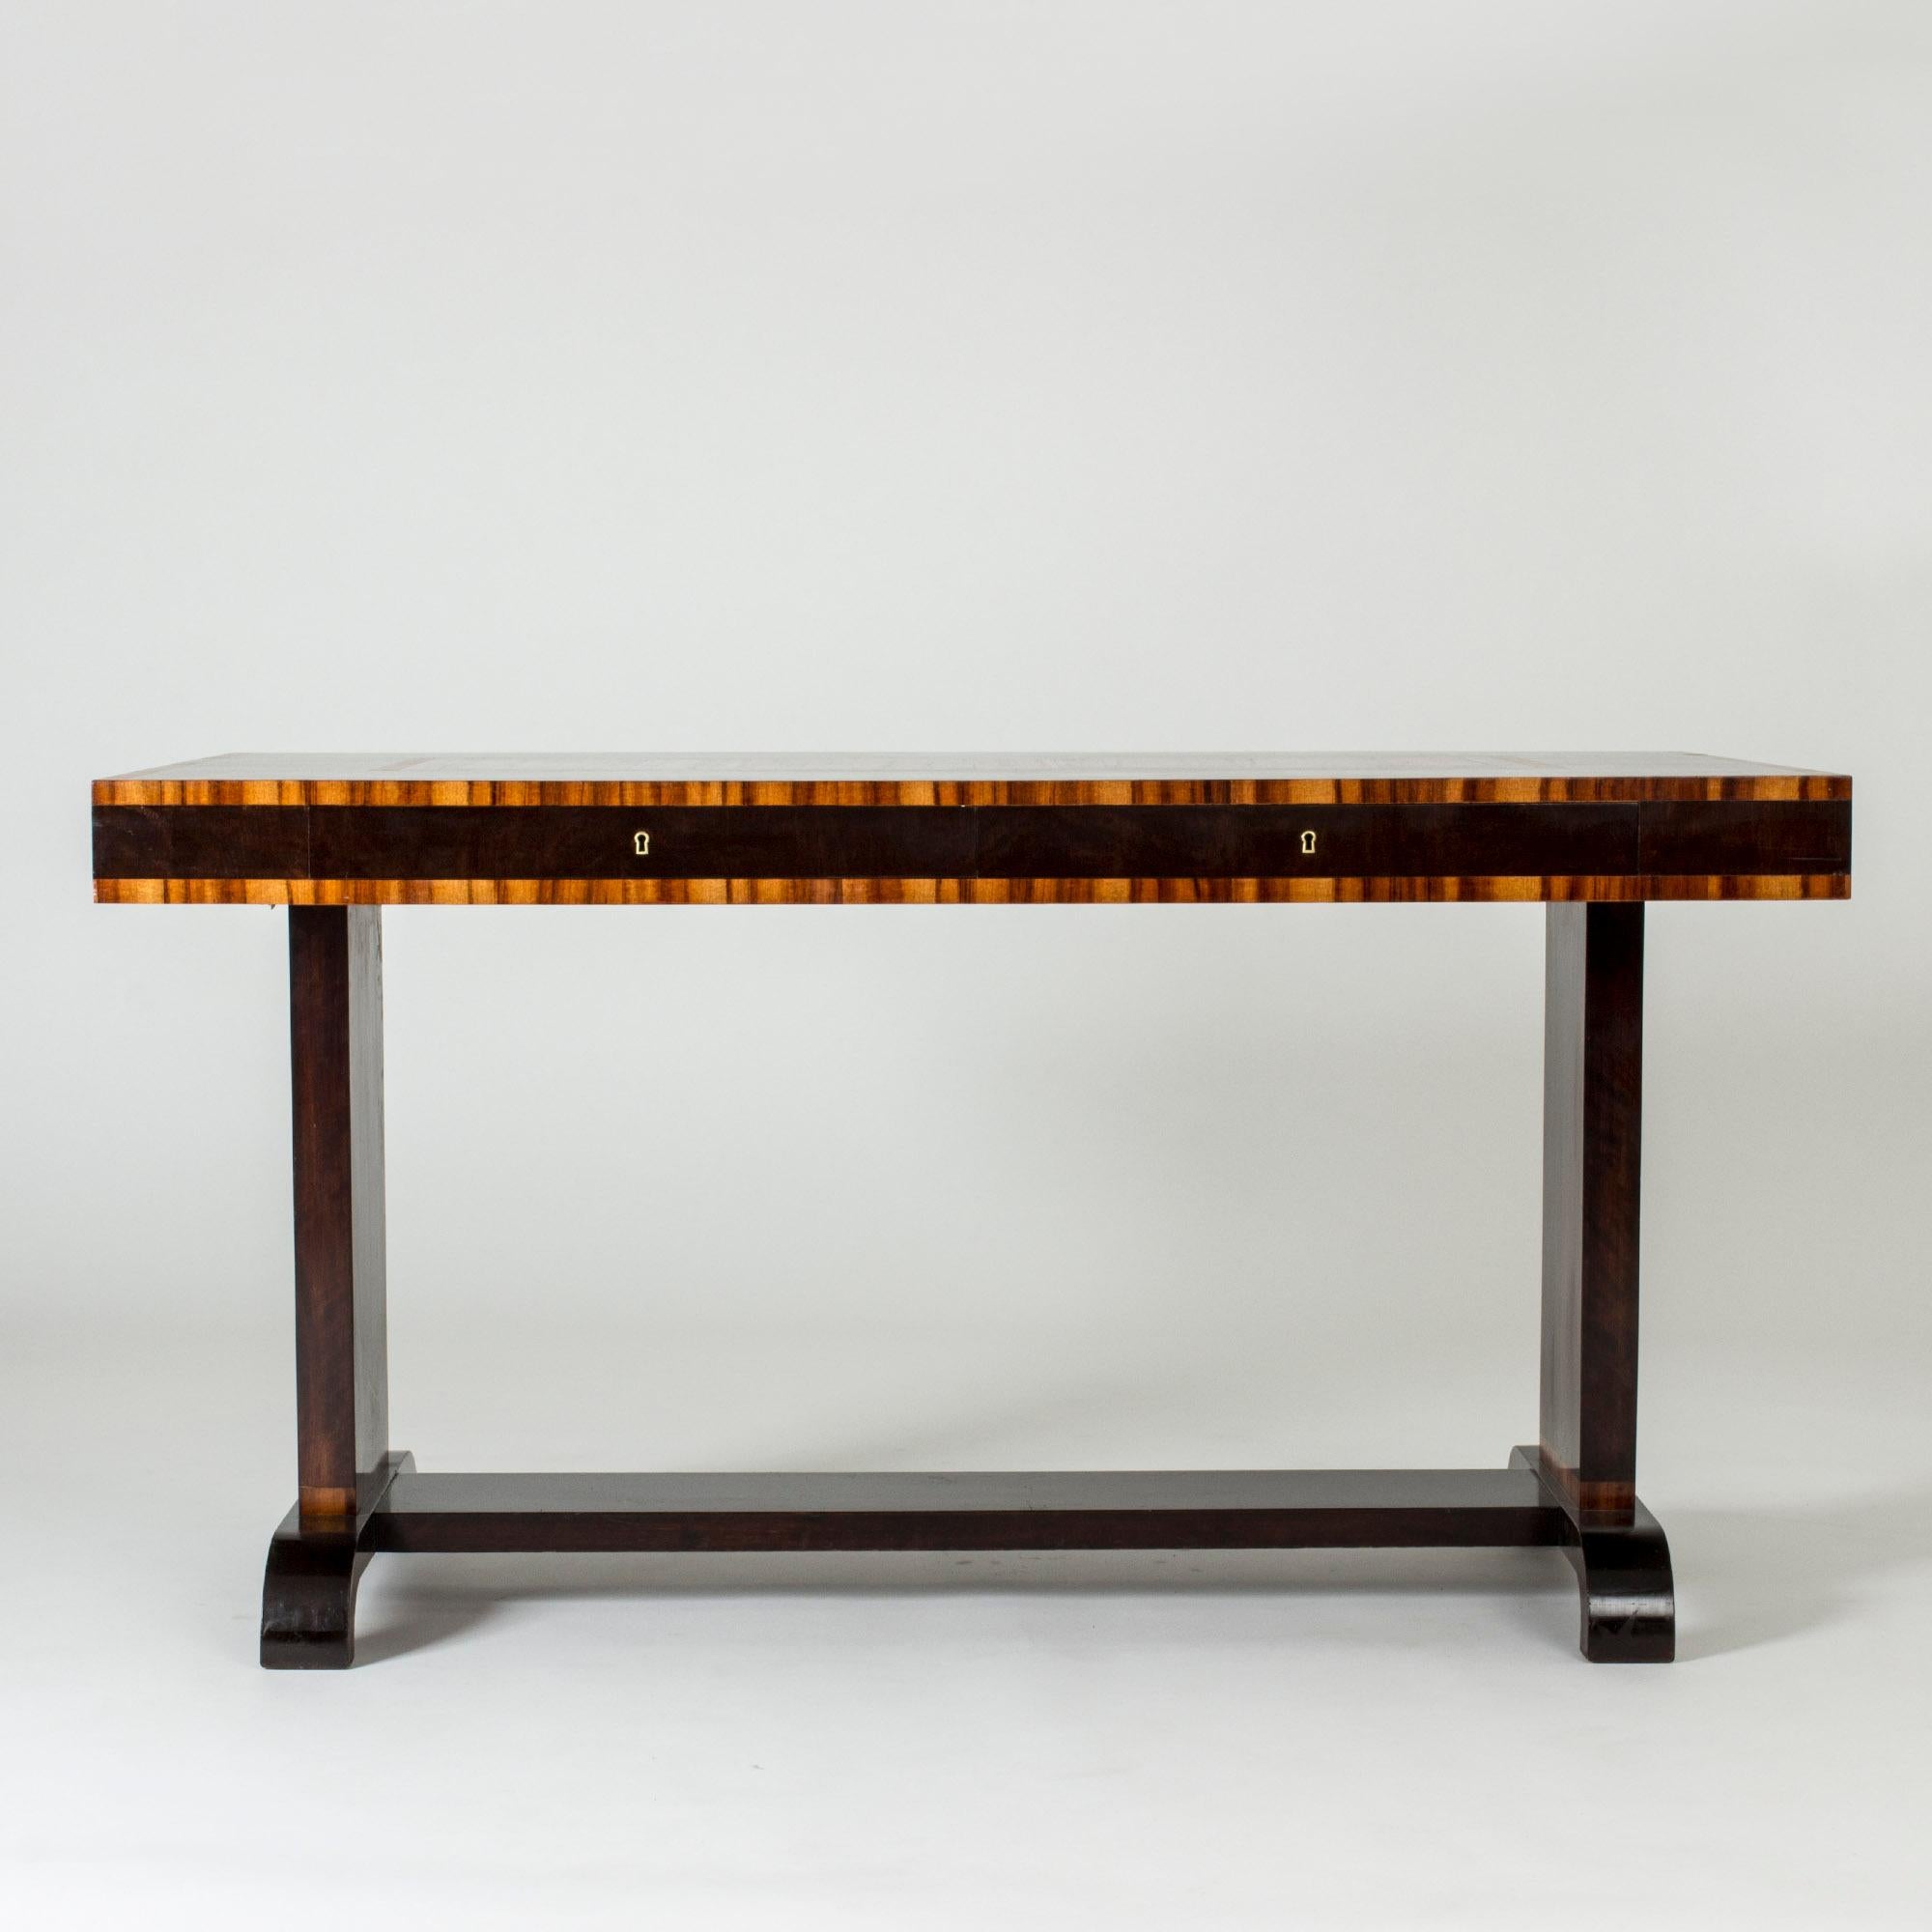 Amazing desk by Axel Larsson, made from dark stained wood with striking contrasting wood inlays with a striped pattern. Distinct functionalist design.